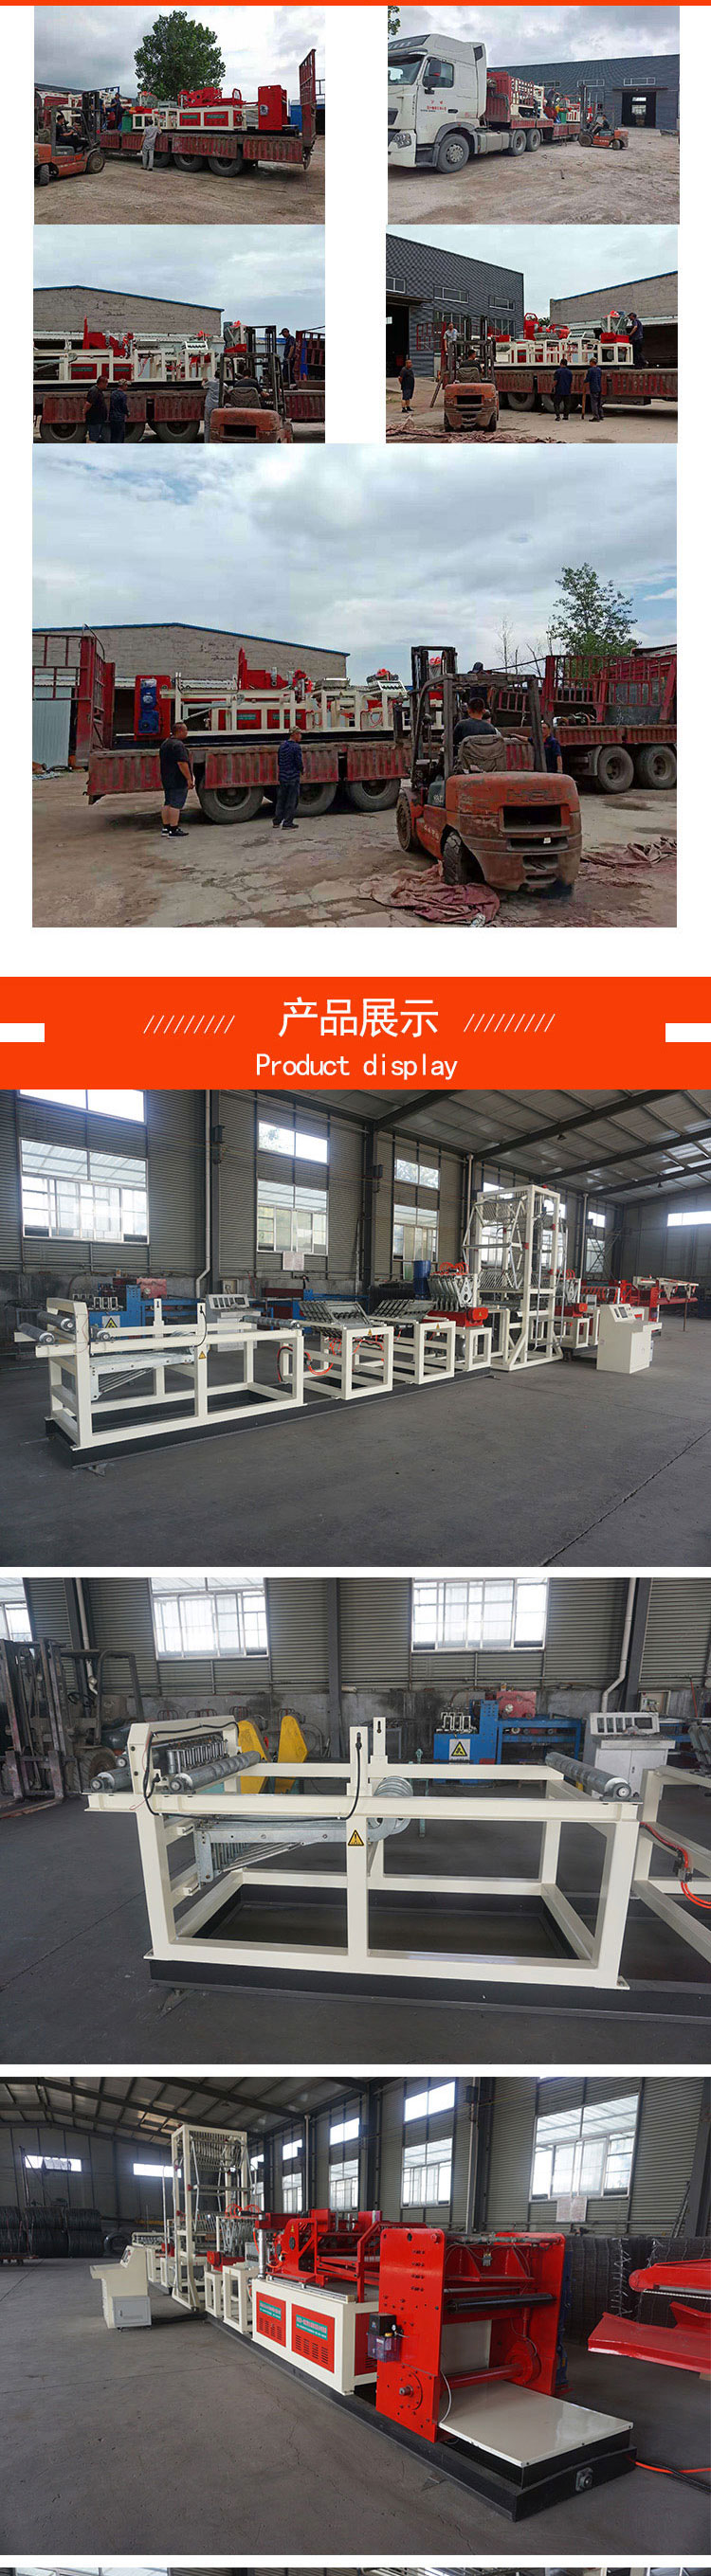 Fully automatic gas filled plate mesh welding production line JLM-GWD-600 welding line Jinlema